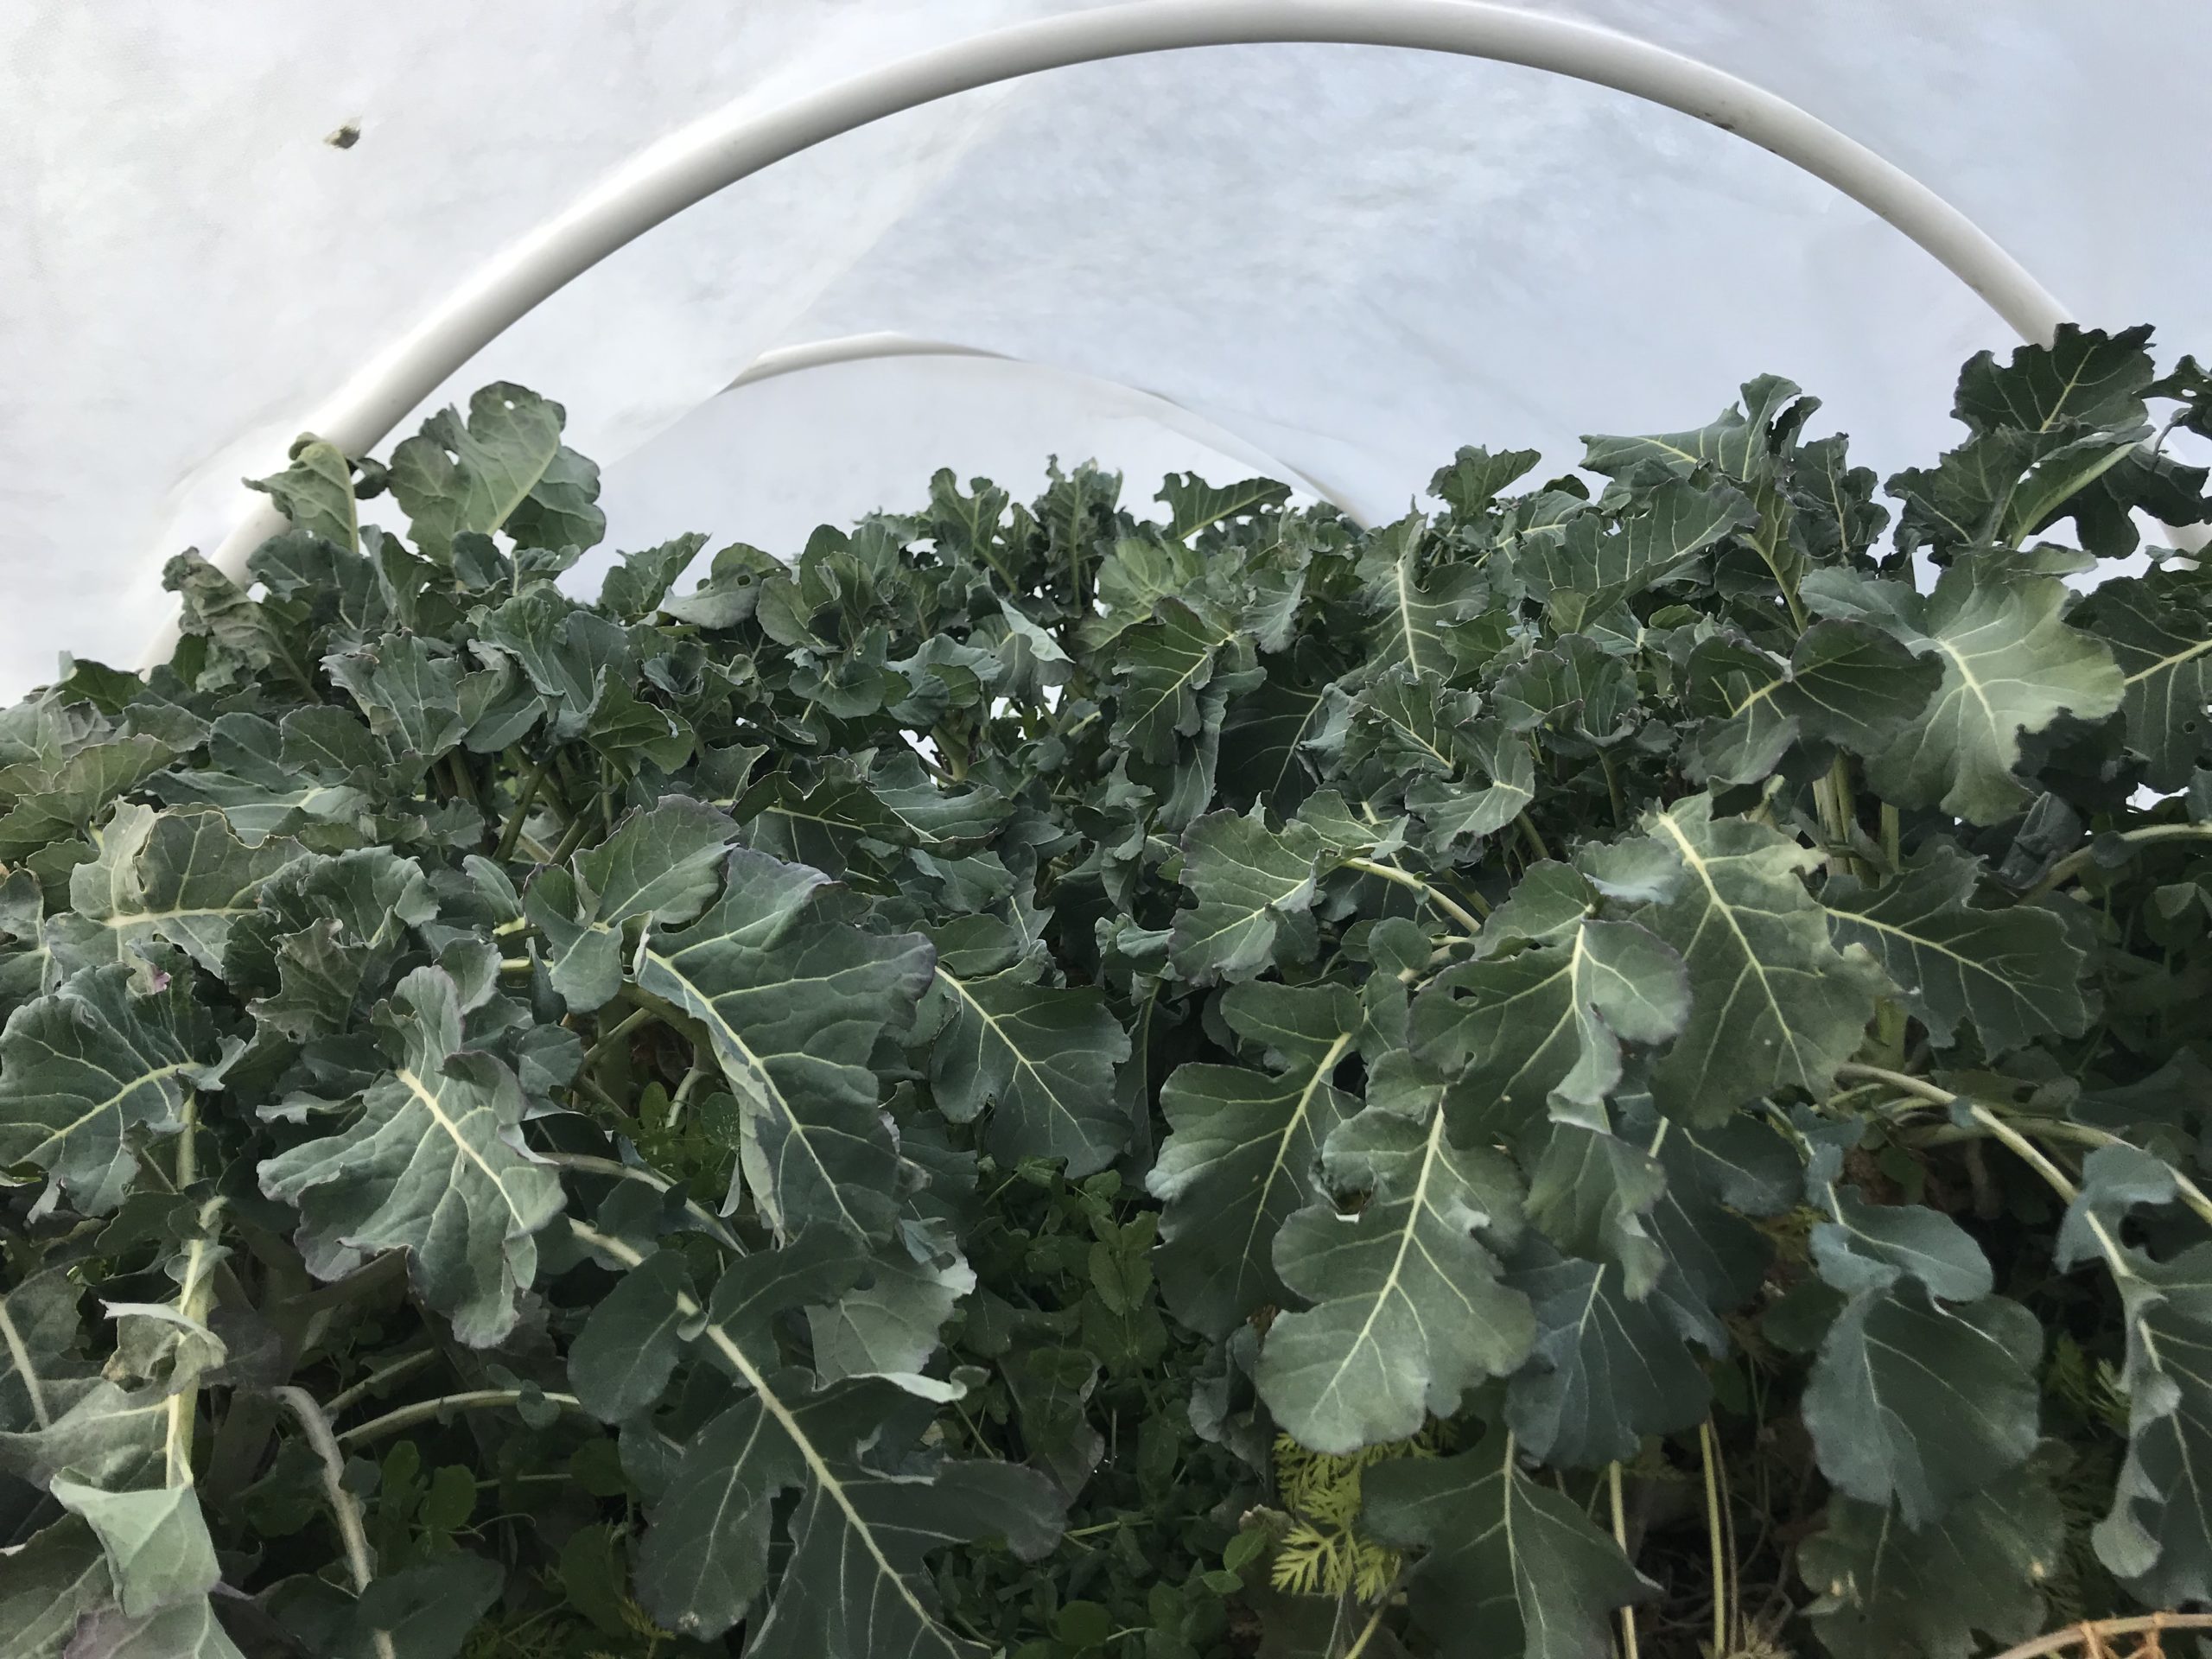 shows the large leafy sprouting broccoli plants under a low tunnel